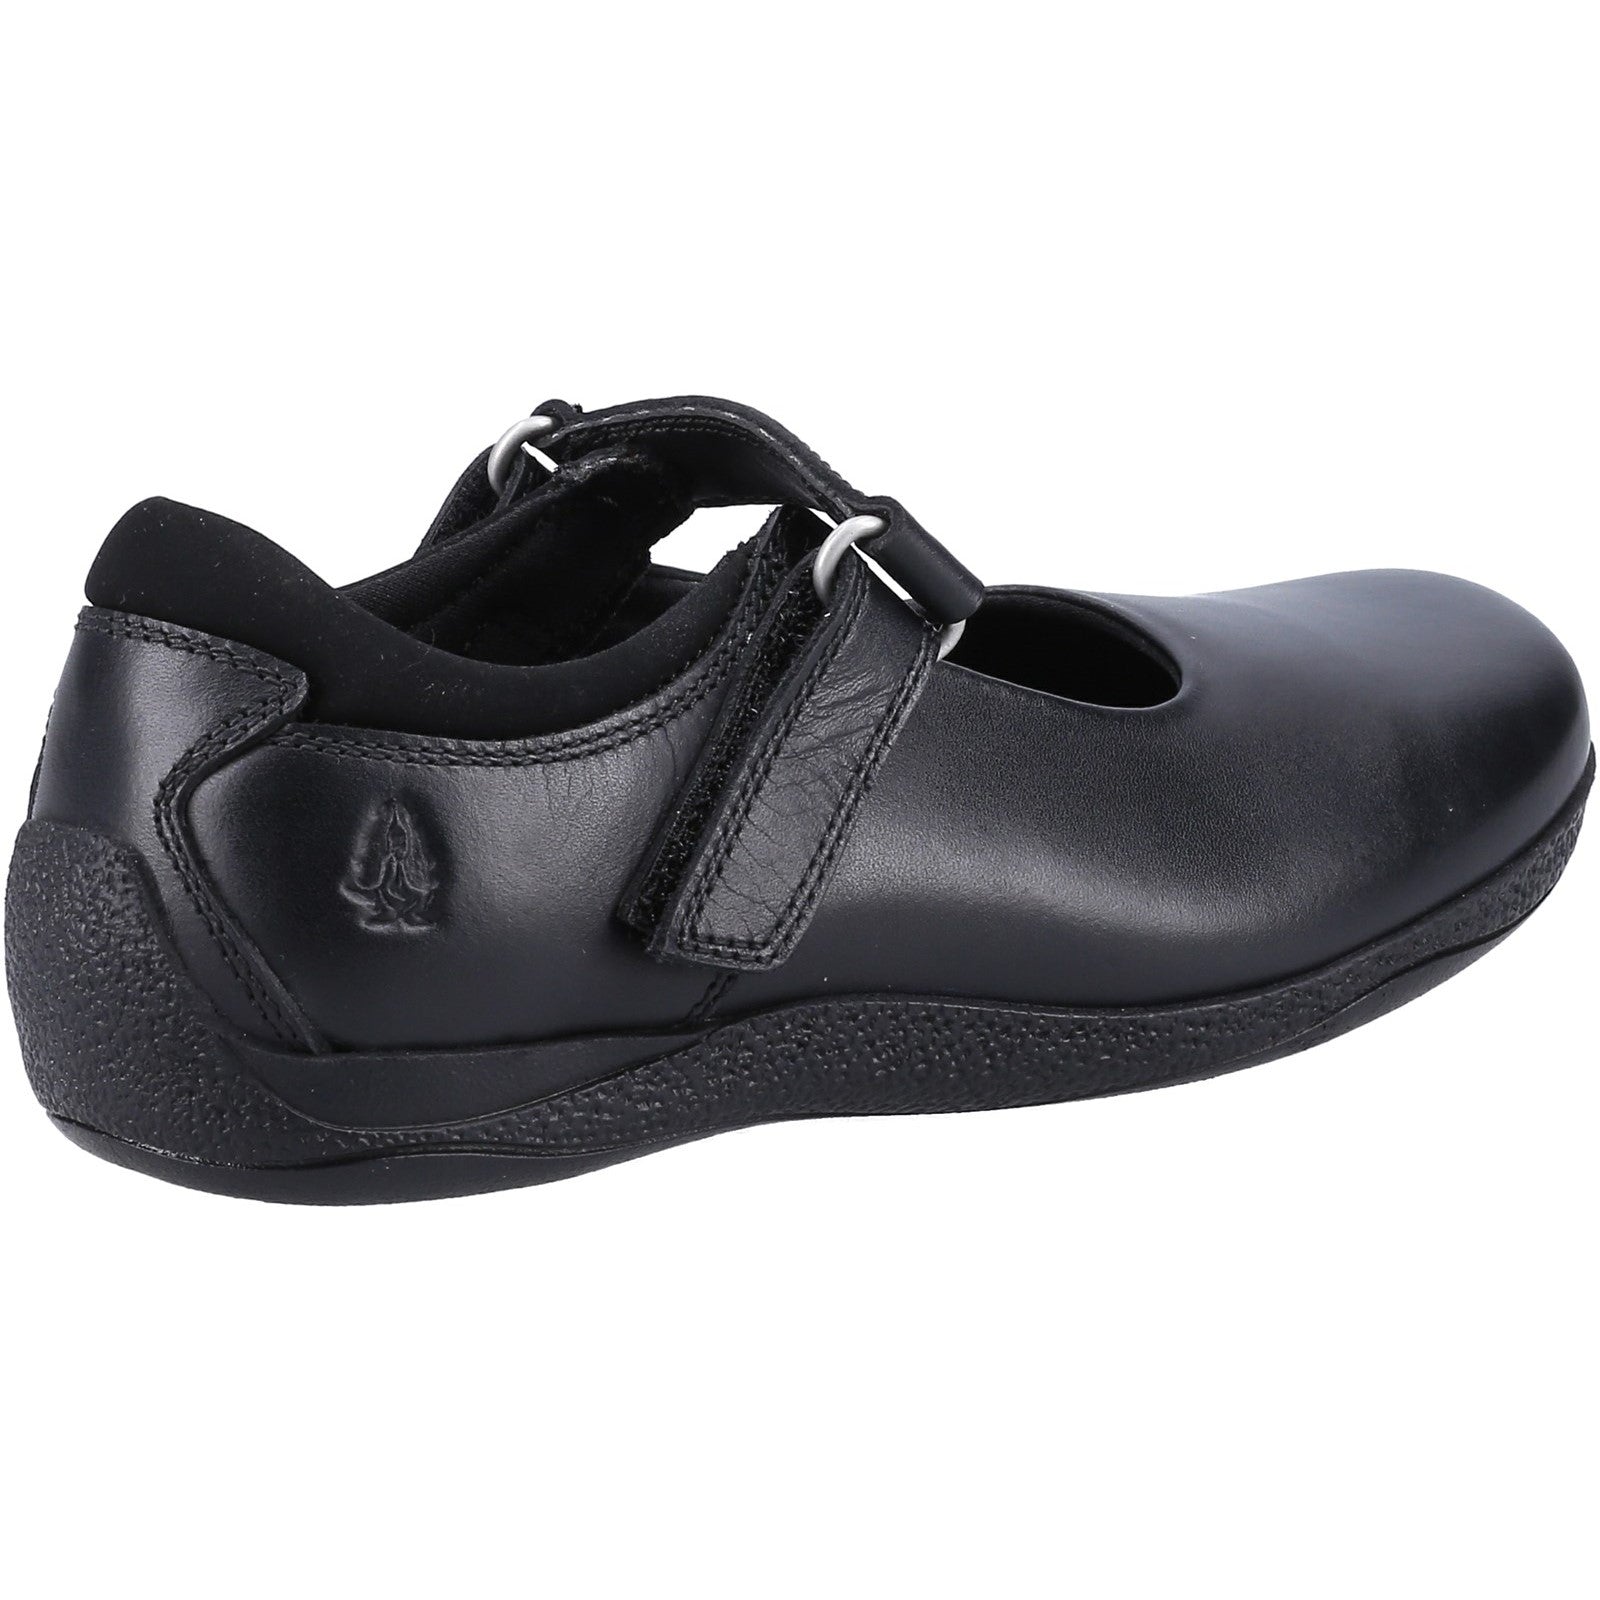 Hush Puppies Girls Marcie Leather School Shoes - Black